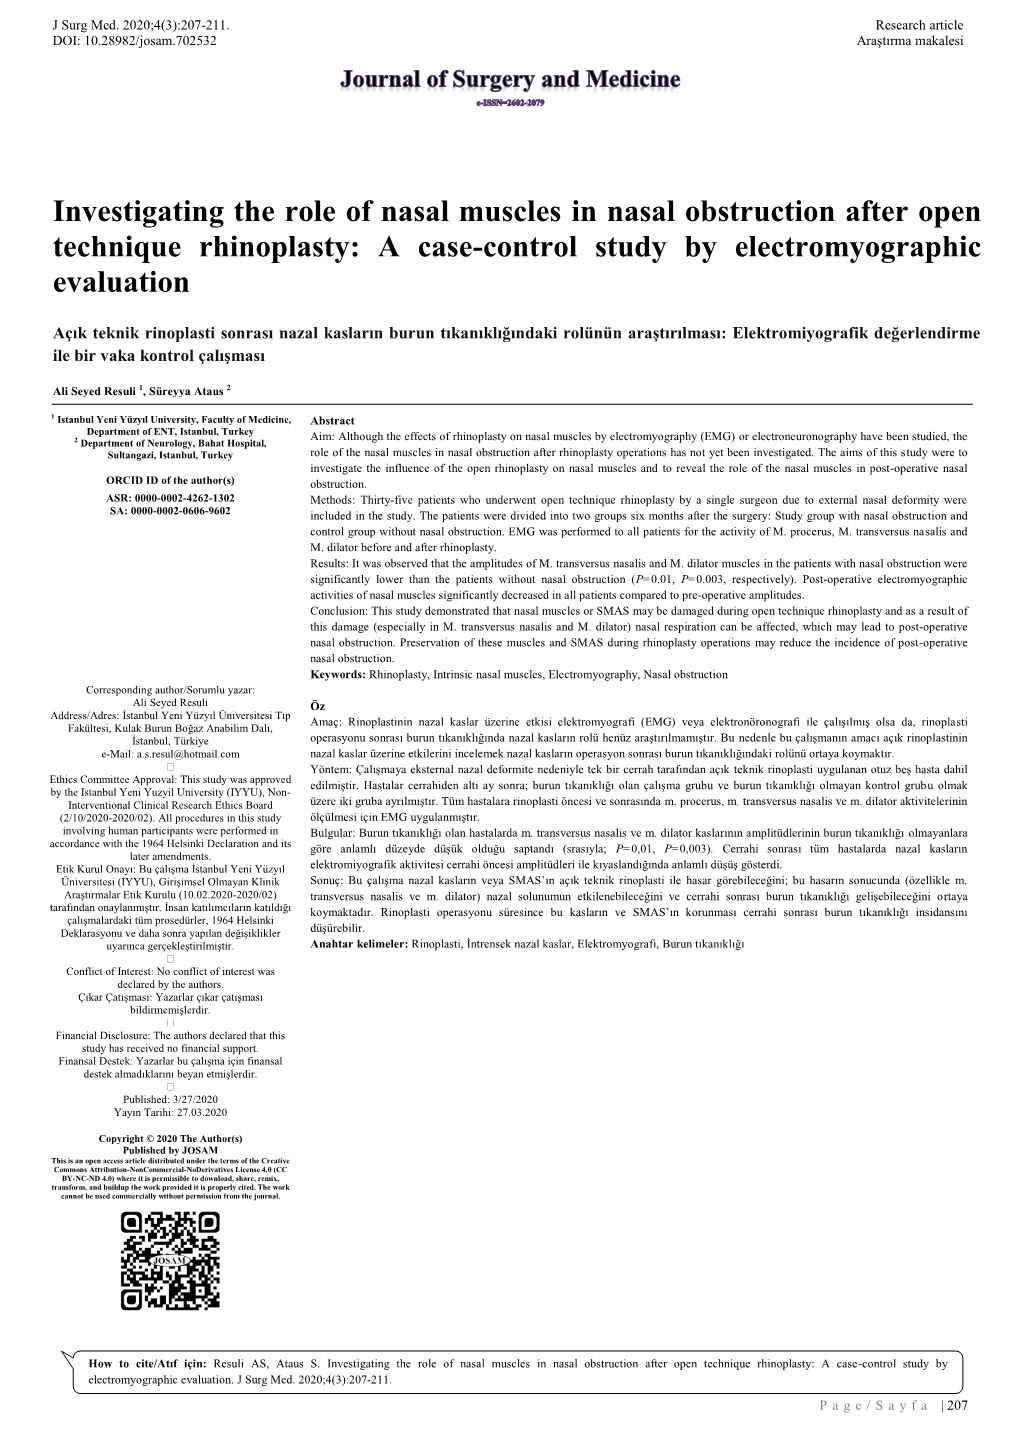 Investigating the Role of Nasal Muscles in Nasal Obstruction After Open Technique Rhinoplasty: a Case-Control Study by Electromyographic Evaluation